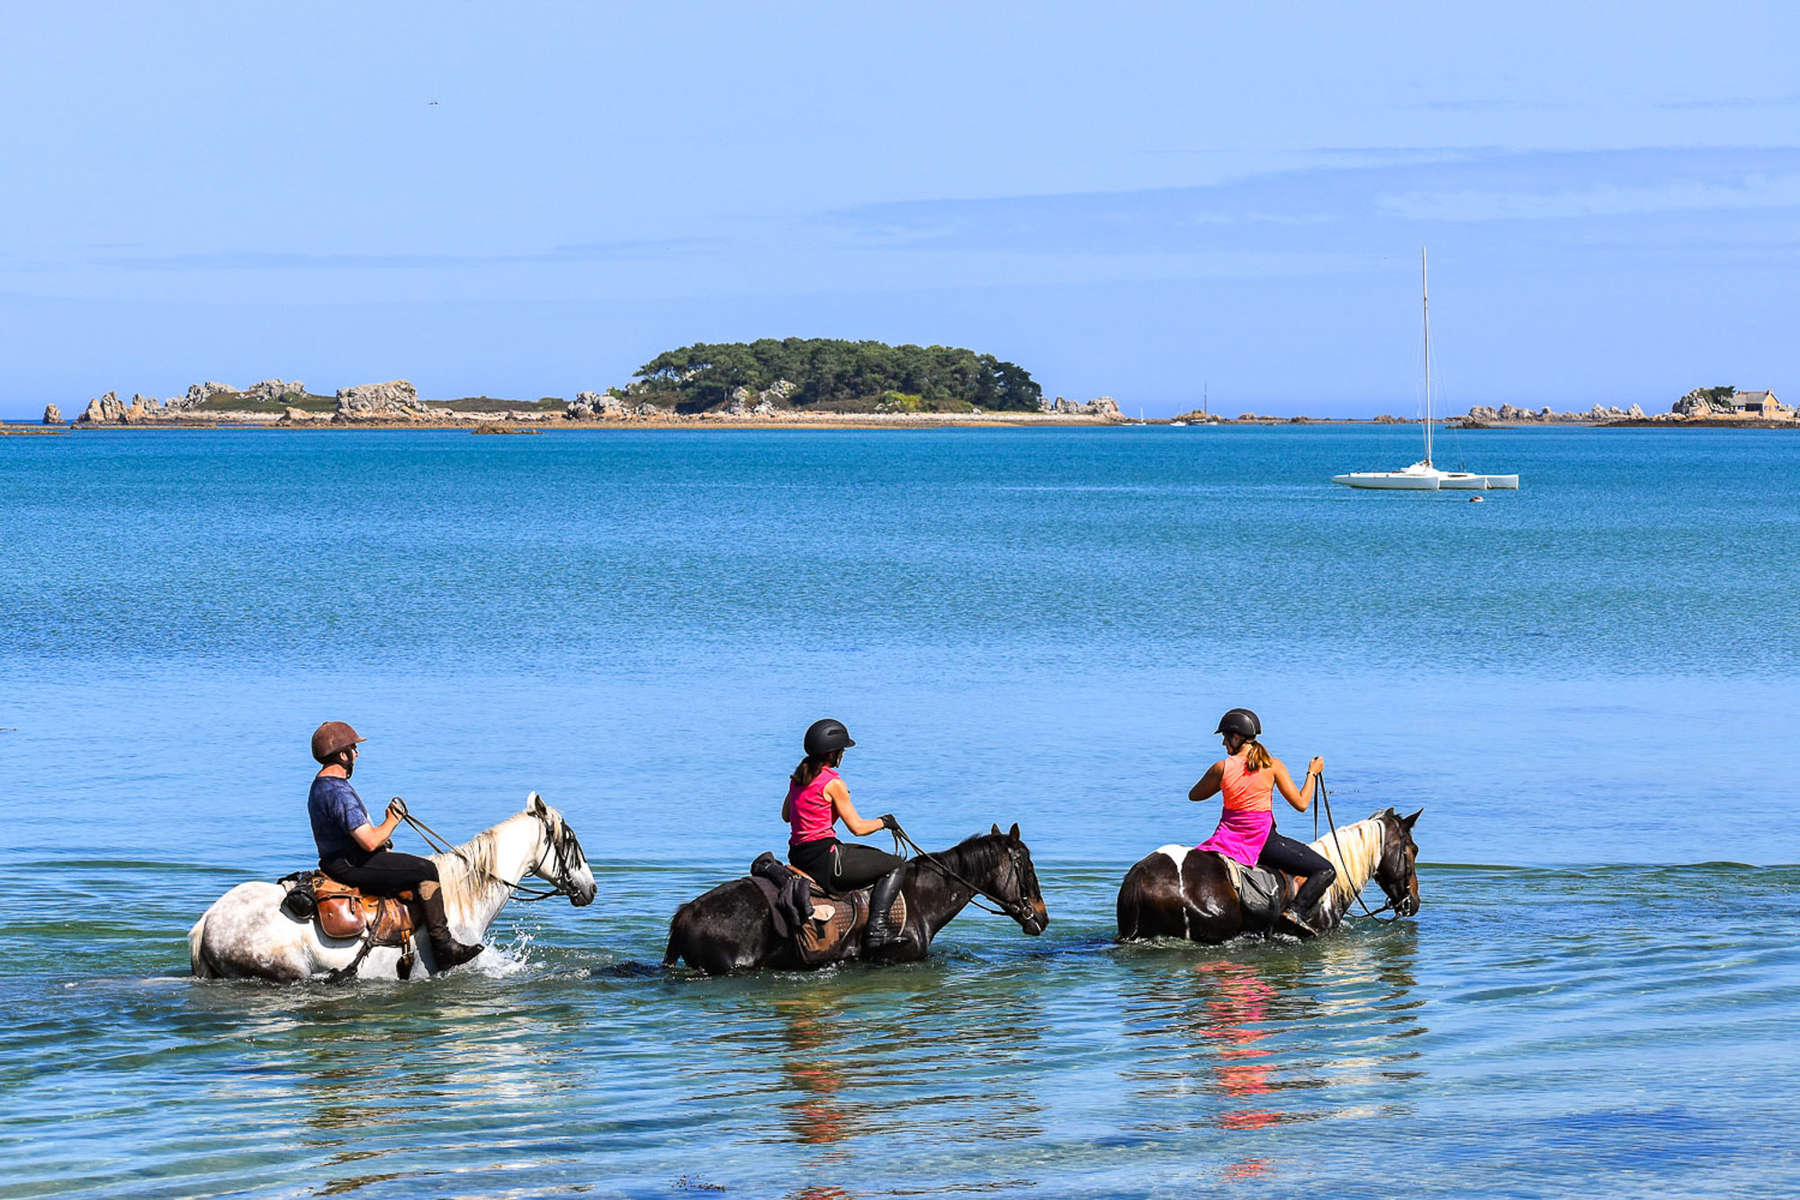 Horses and riders in the ocean in brittany